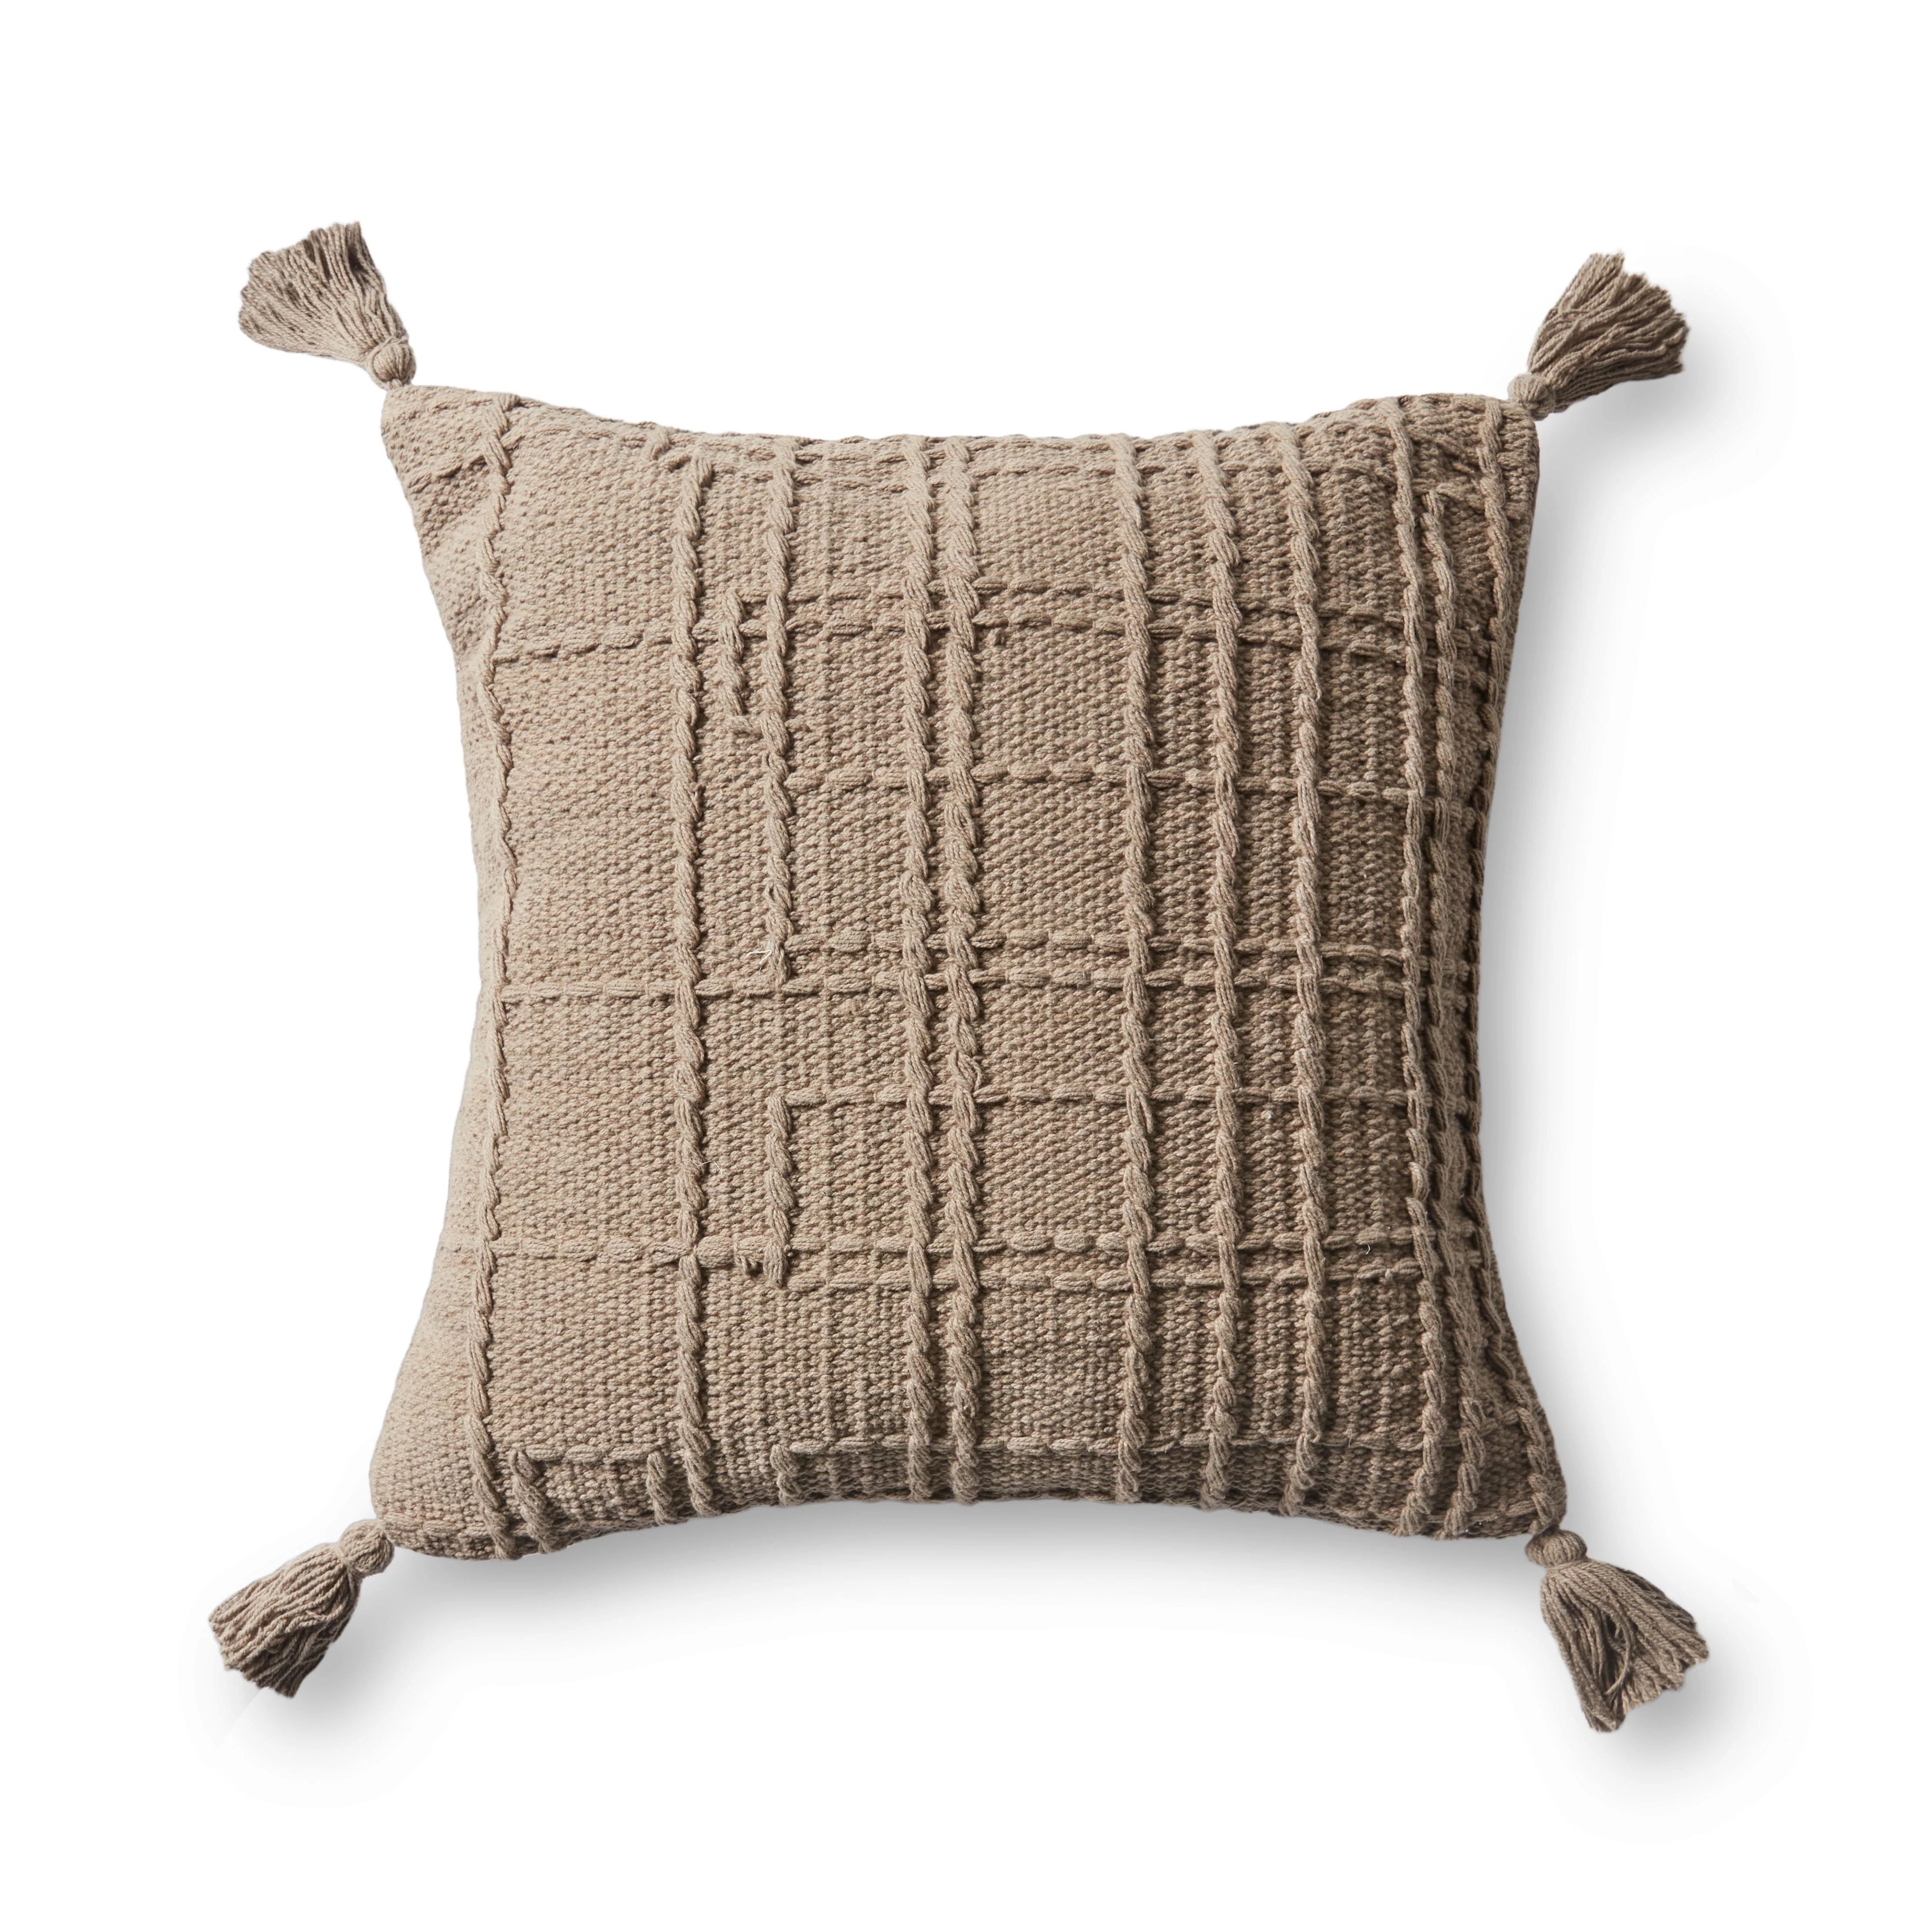 Magnolia Home by Joanna Gaines x Loloi Taupe Pillow | Eco Chic Home